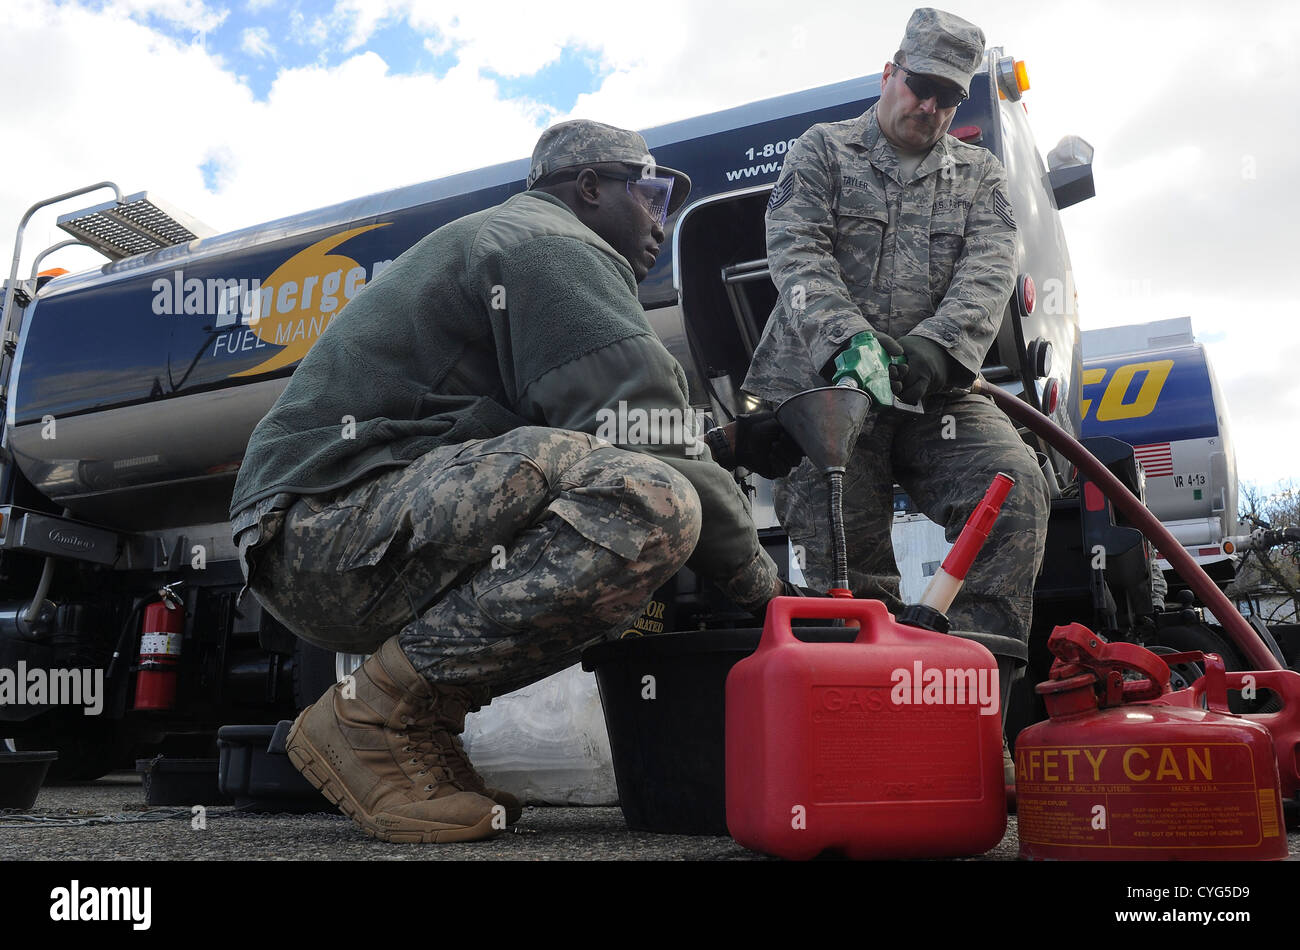 National Guardsmen help distribute free fuel to residents in New York City affected by Hurricane Sandy November 3, 2012 in Staten Island, N.Y. The federal government purchased 12 million gallons of unleaded fuel and 10 million gallons of diesel fuel for distribution in areas impacted by the storm. Stock Photo